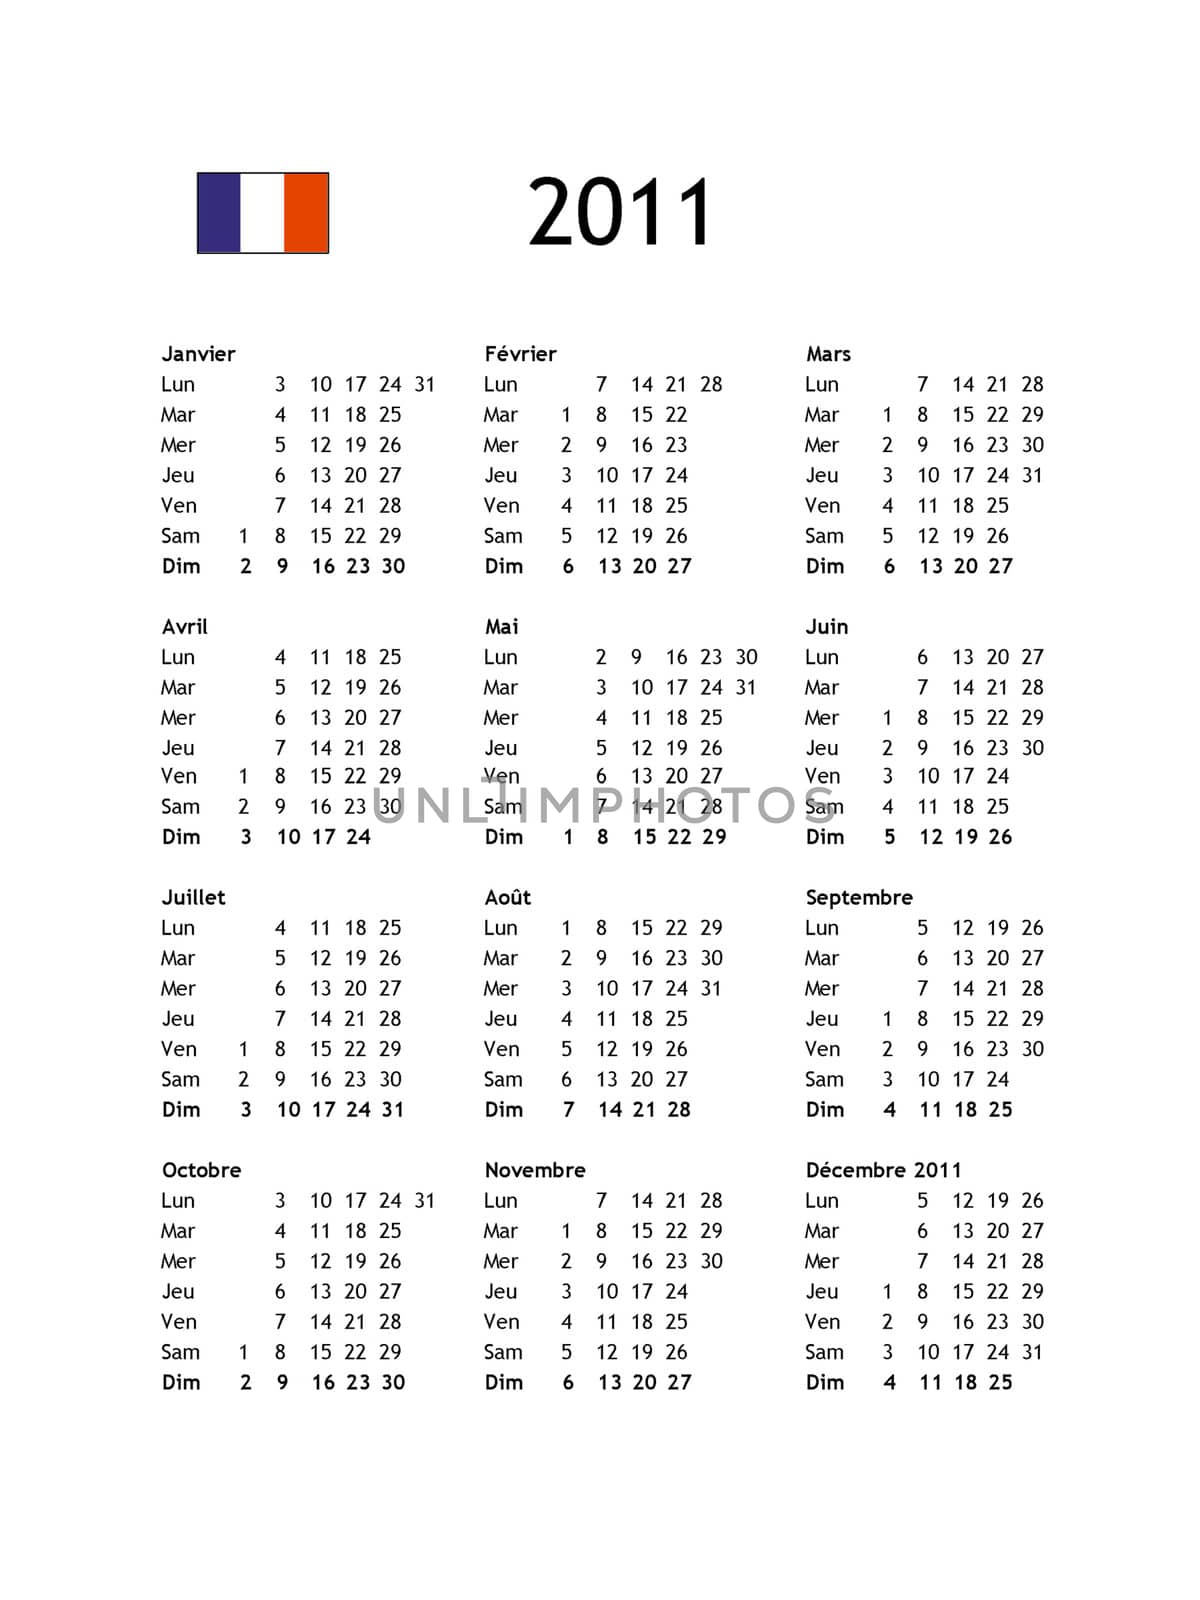 French calendar of year 2011 - black text on white background